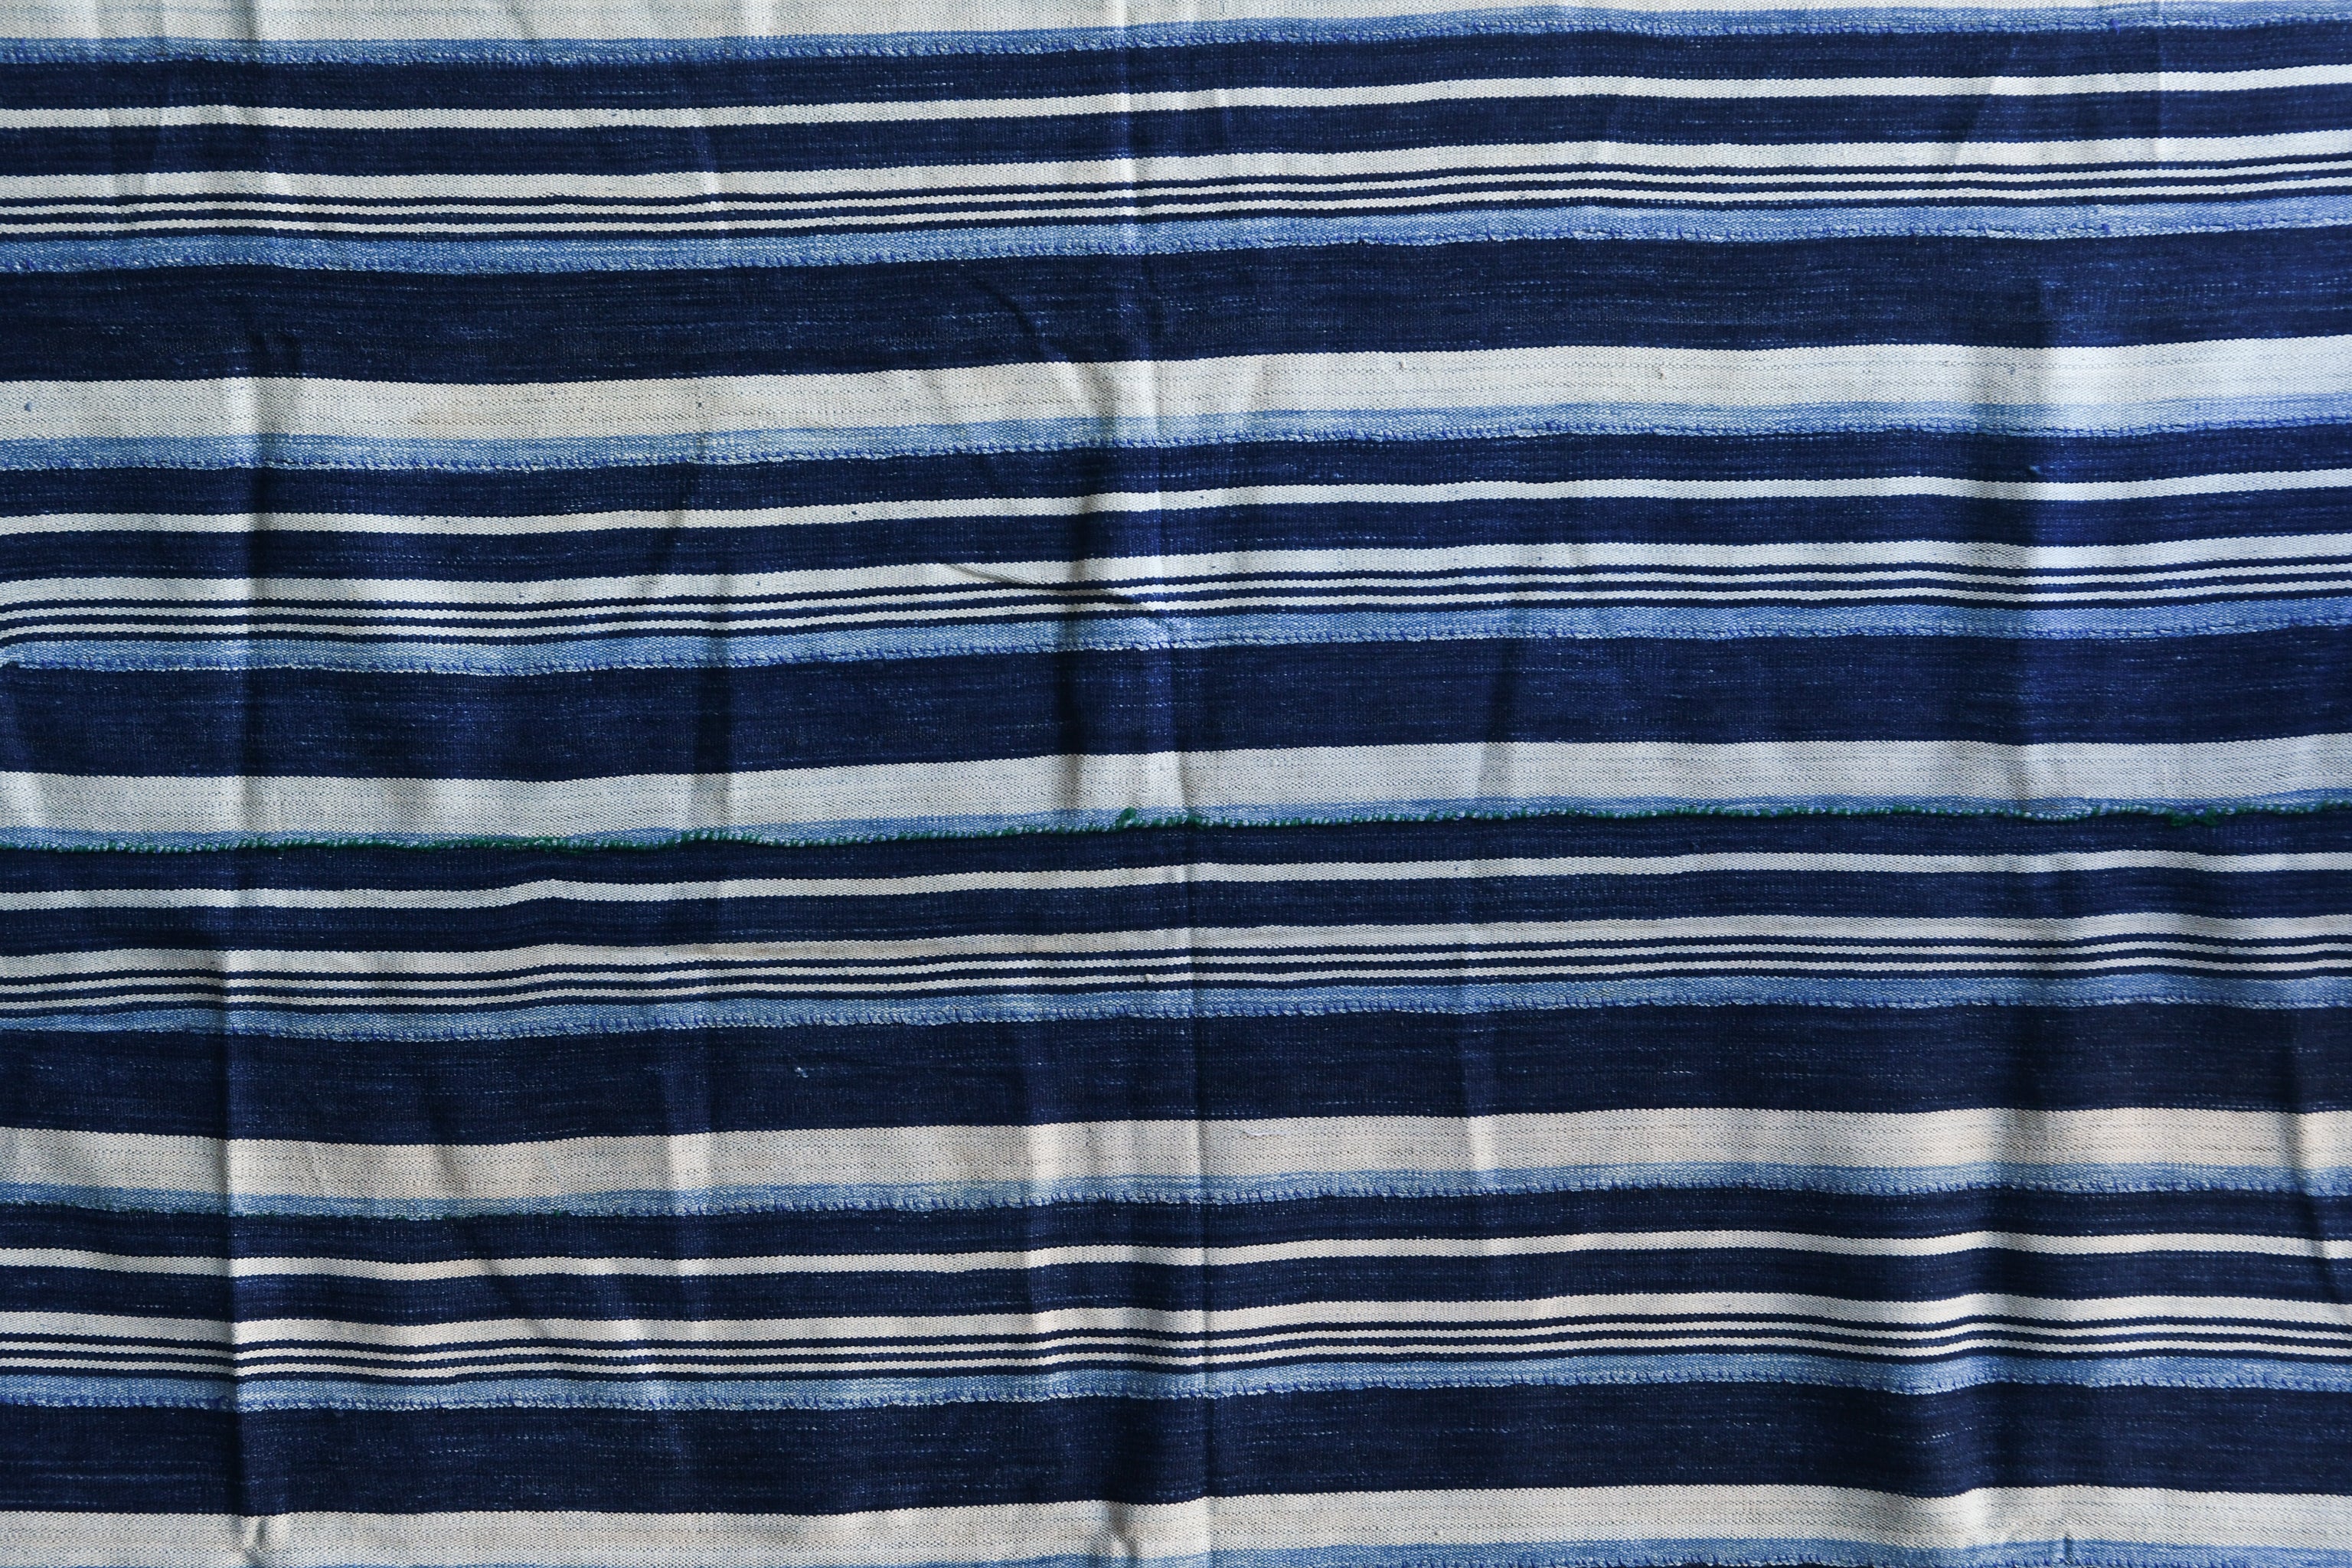 Handcrafted Textiles - African Art - Woven Cotton - Used - Home Decor - African Plural Art - Decorative African Indigo Textile, Blue White Vintage Cotton Fabric